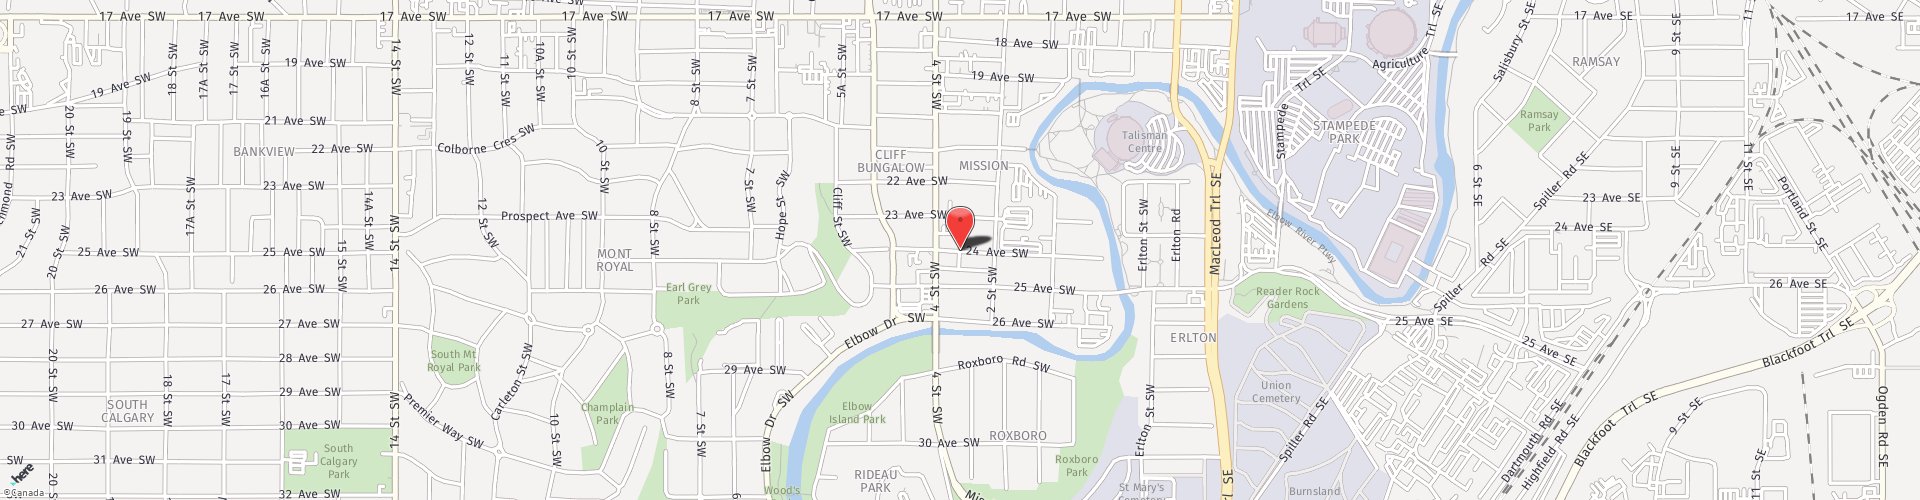 Location Map: 333 24 Ave South West Calgary, AB T2S 3E6